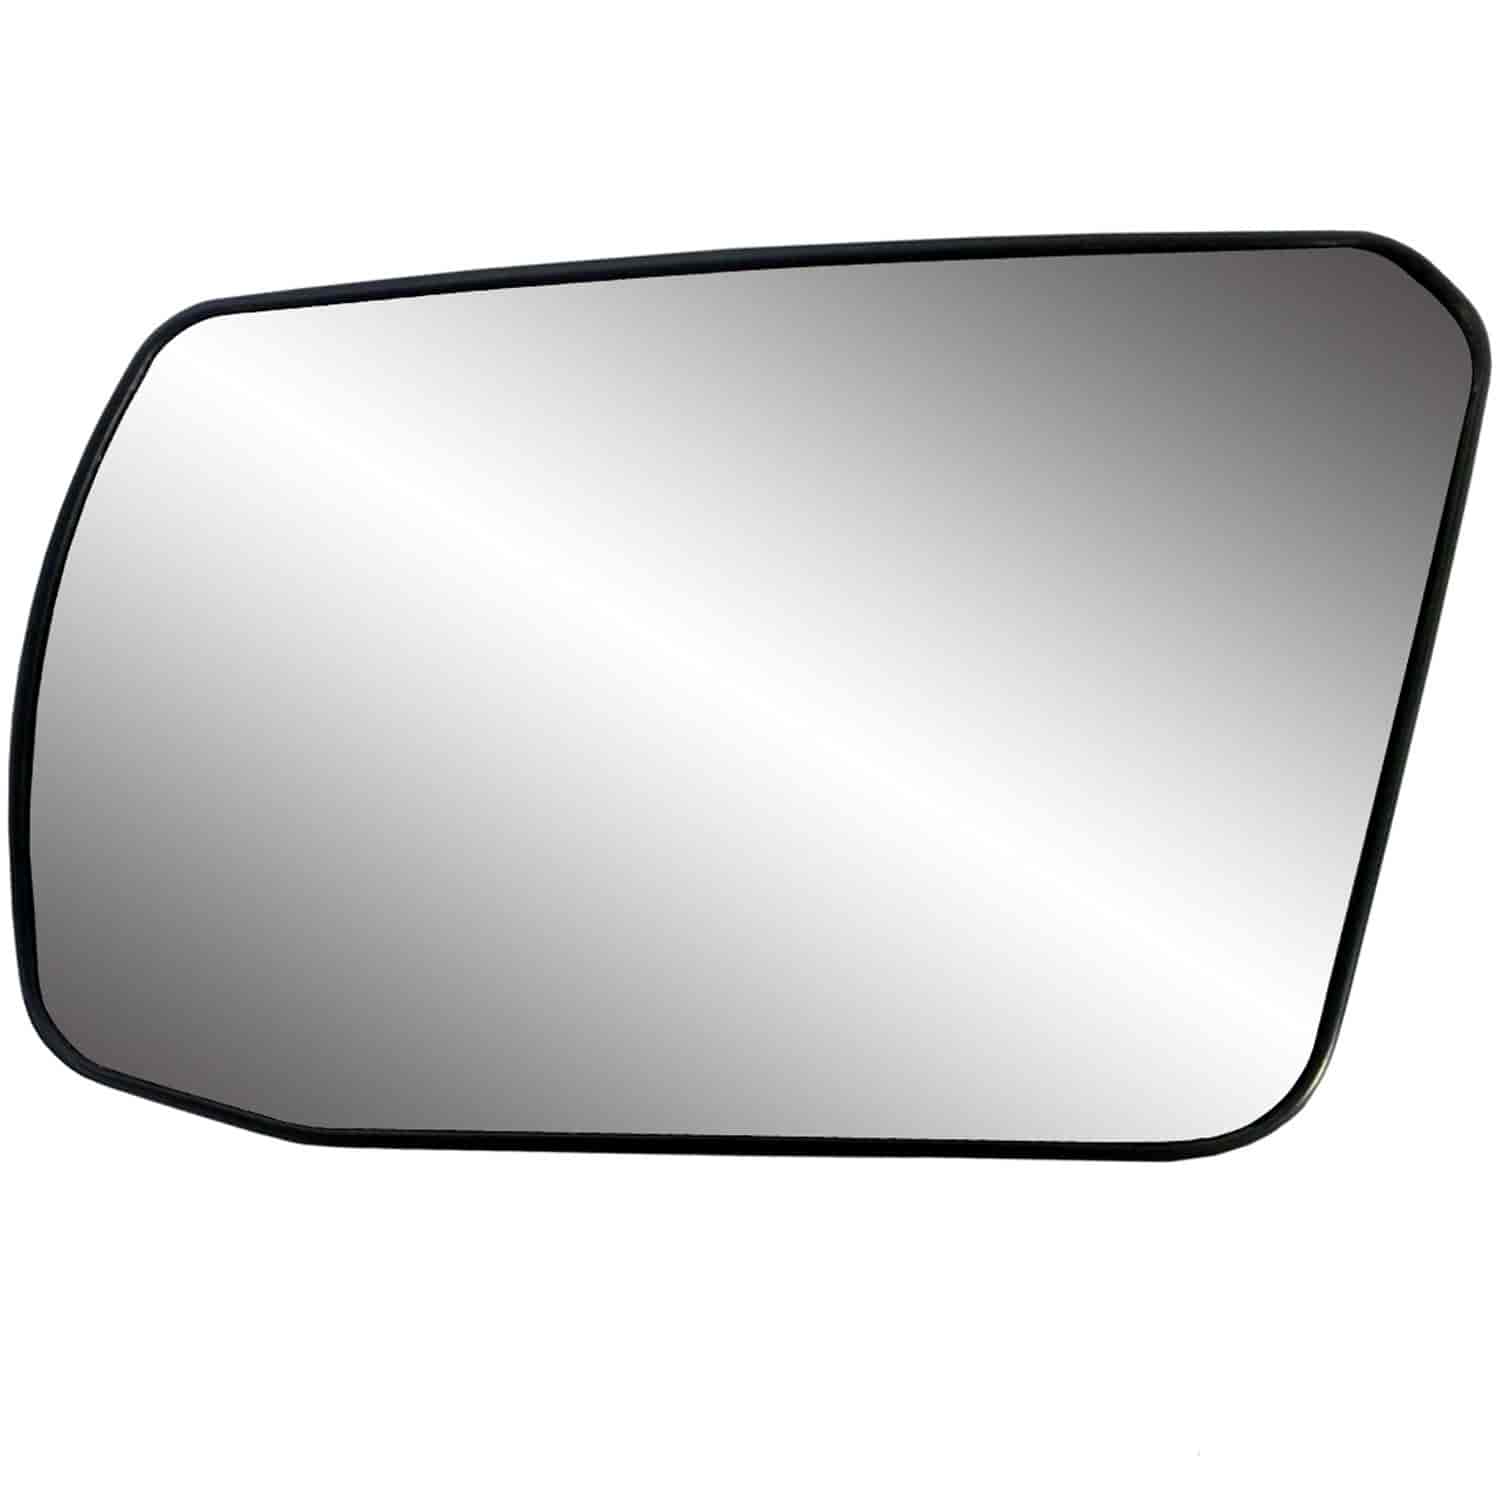 Replacement Glass Assembly for 08-13 Altima Coupe non-foldaway mirror; 07-11 Altima Hybrid non-folda